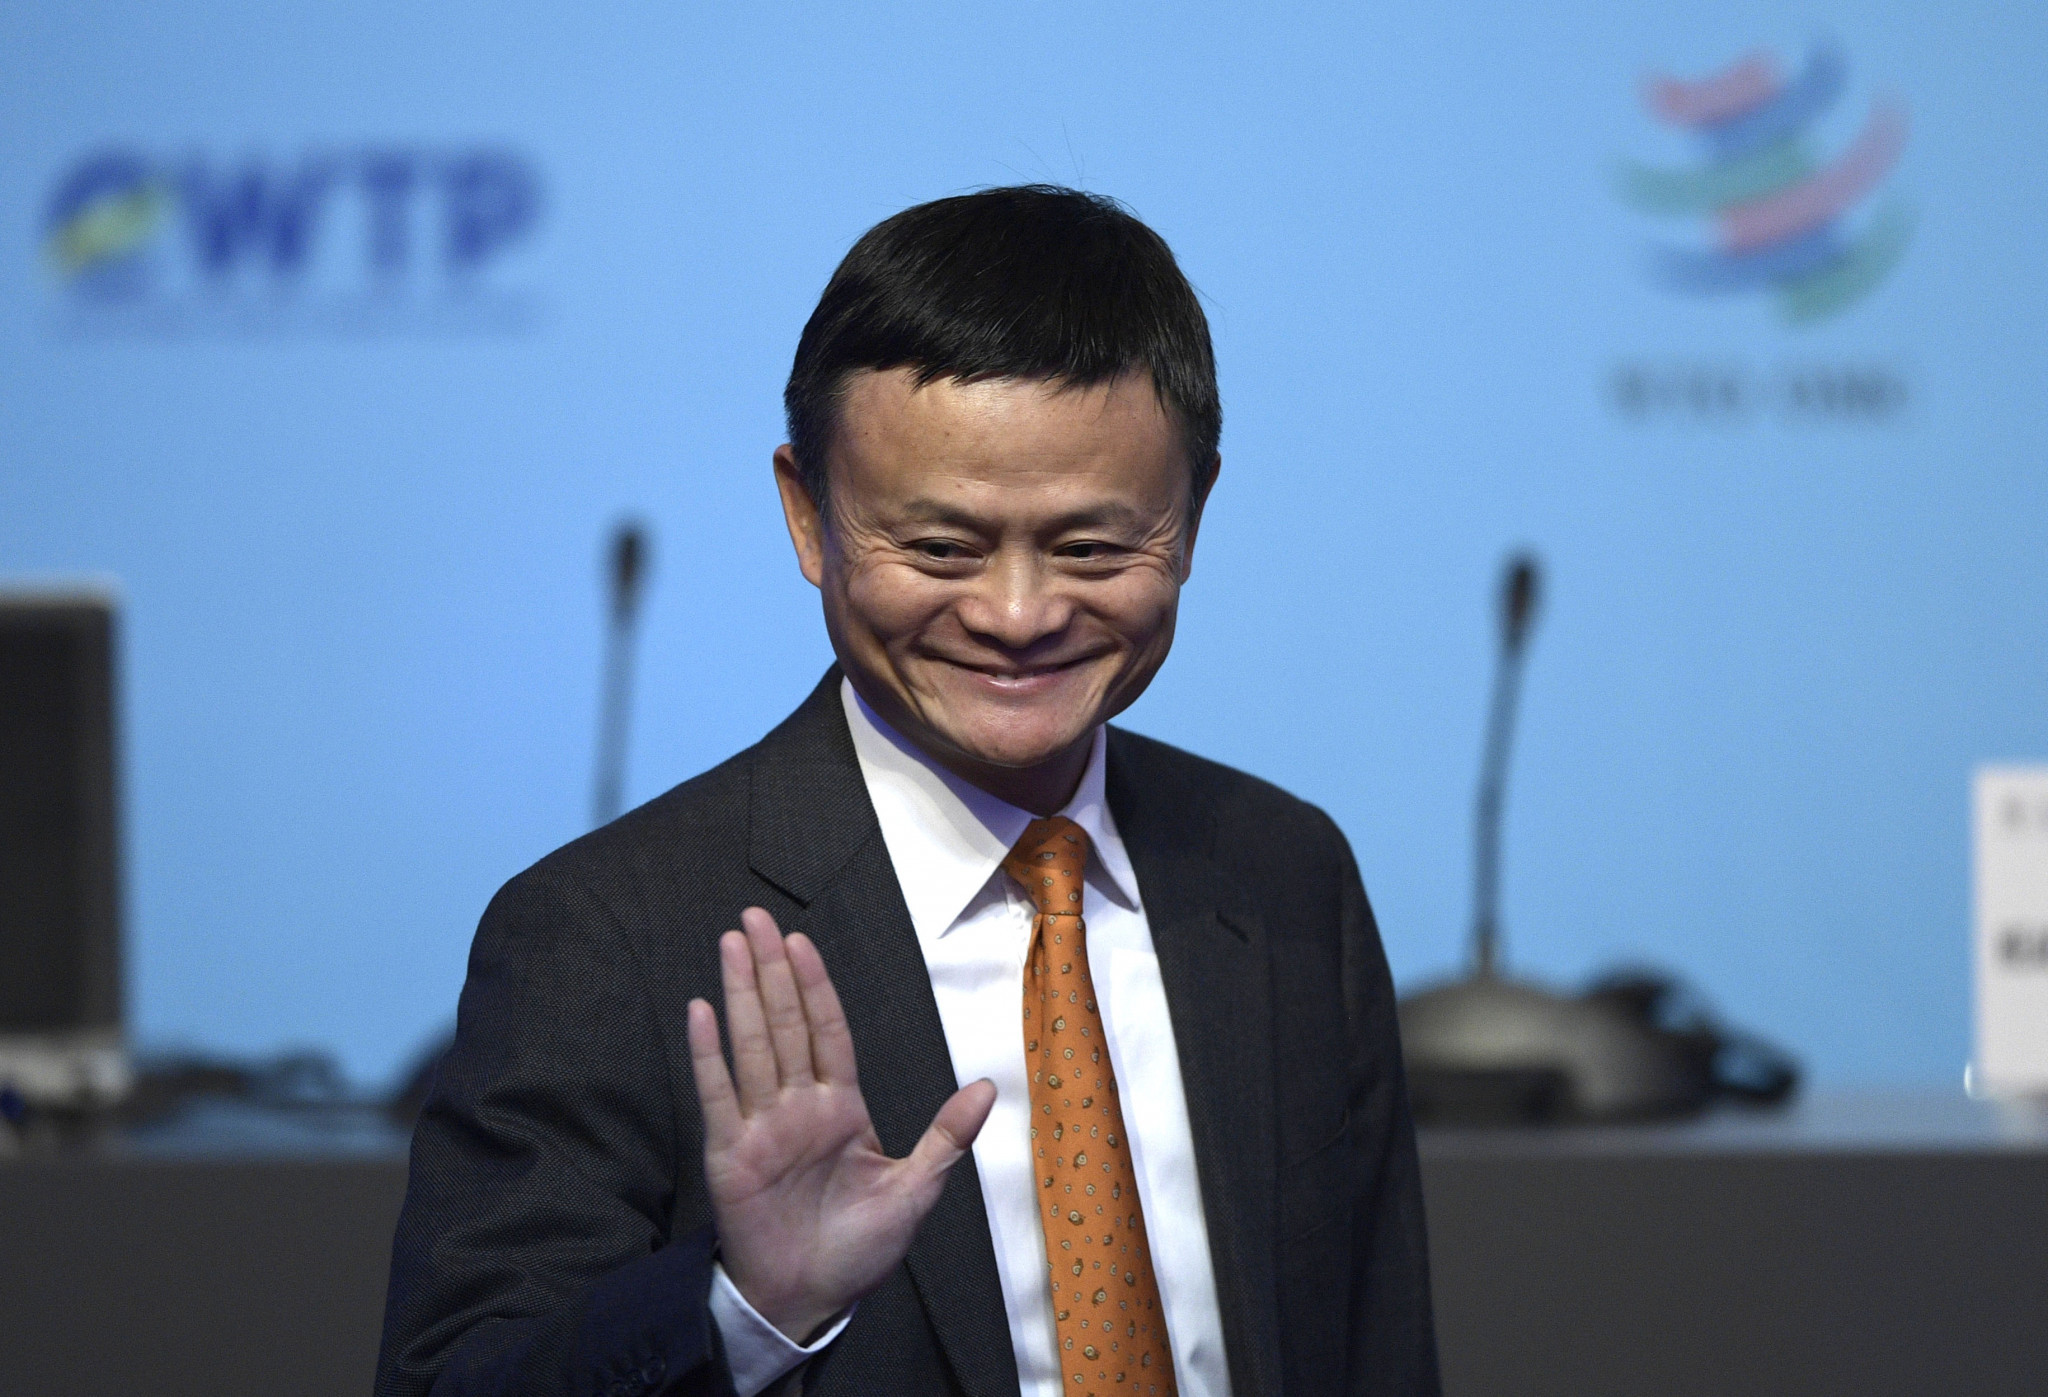 Alibaba Group, whose chief executive is Jack Ma, reportedly signed a 12-year contract with the IOC when it became a TOP sponsor ©Getty Images